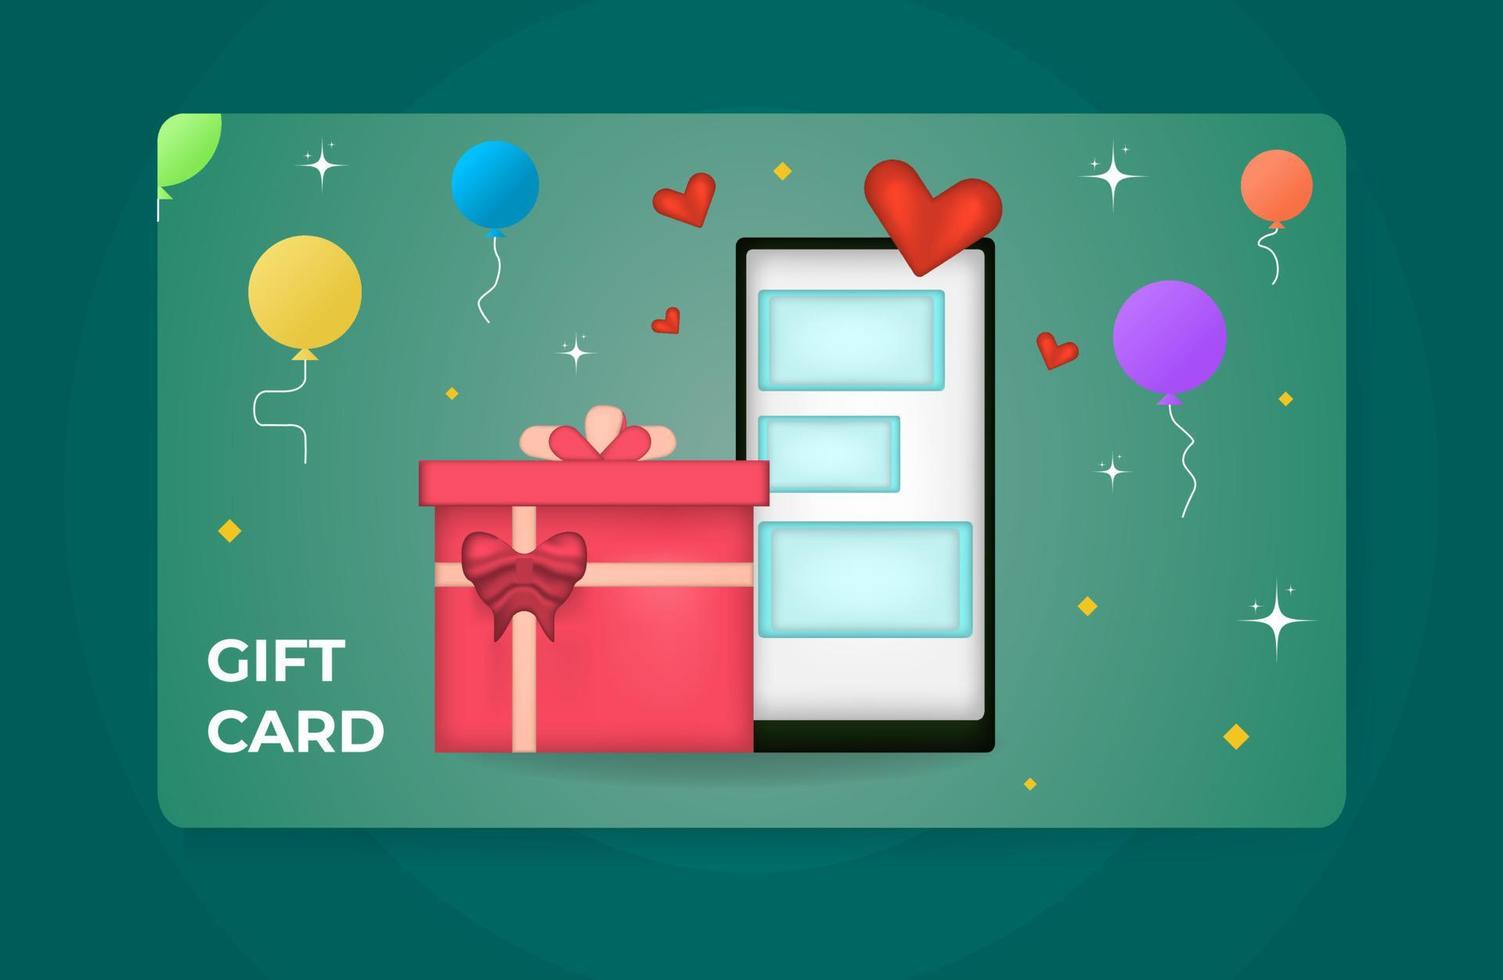 Customer gift card with illustration of 3d render style, mobile, balloons, hearts, stars, clean modern template isolated on green background. vector